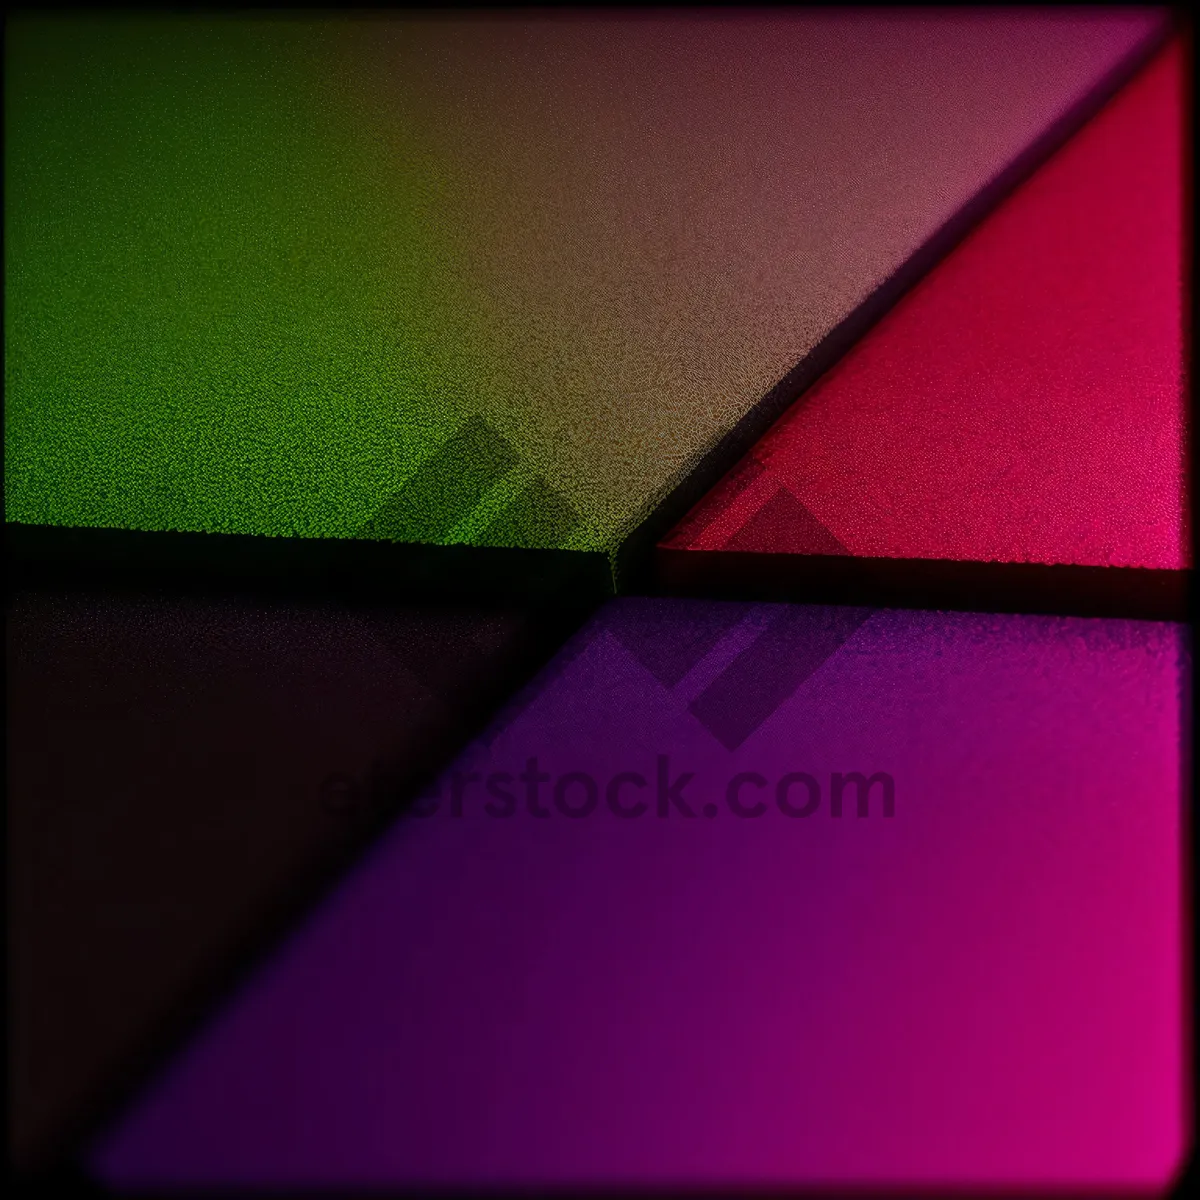 Picture of Modern Artistic Graphic Design Wallpaper with Colorful Shape and Light